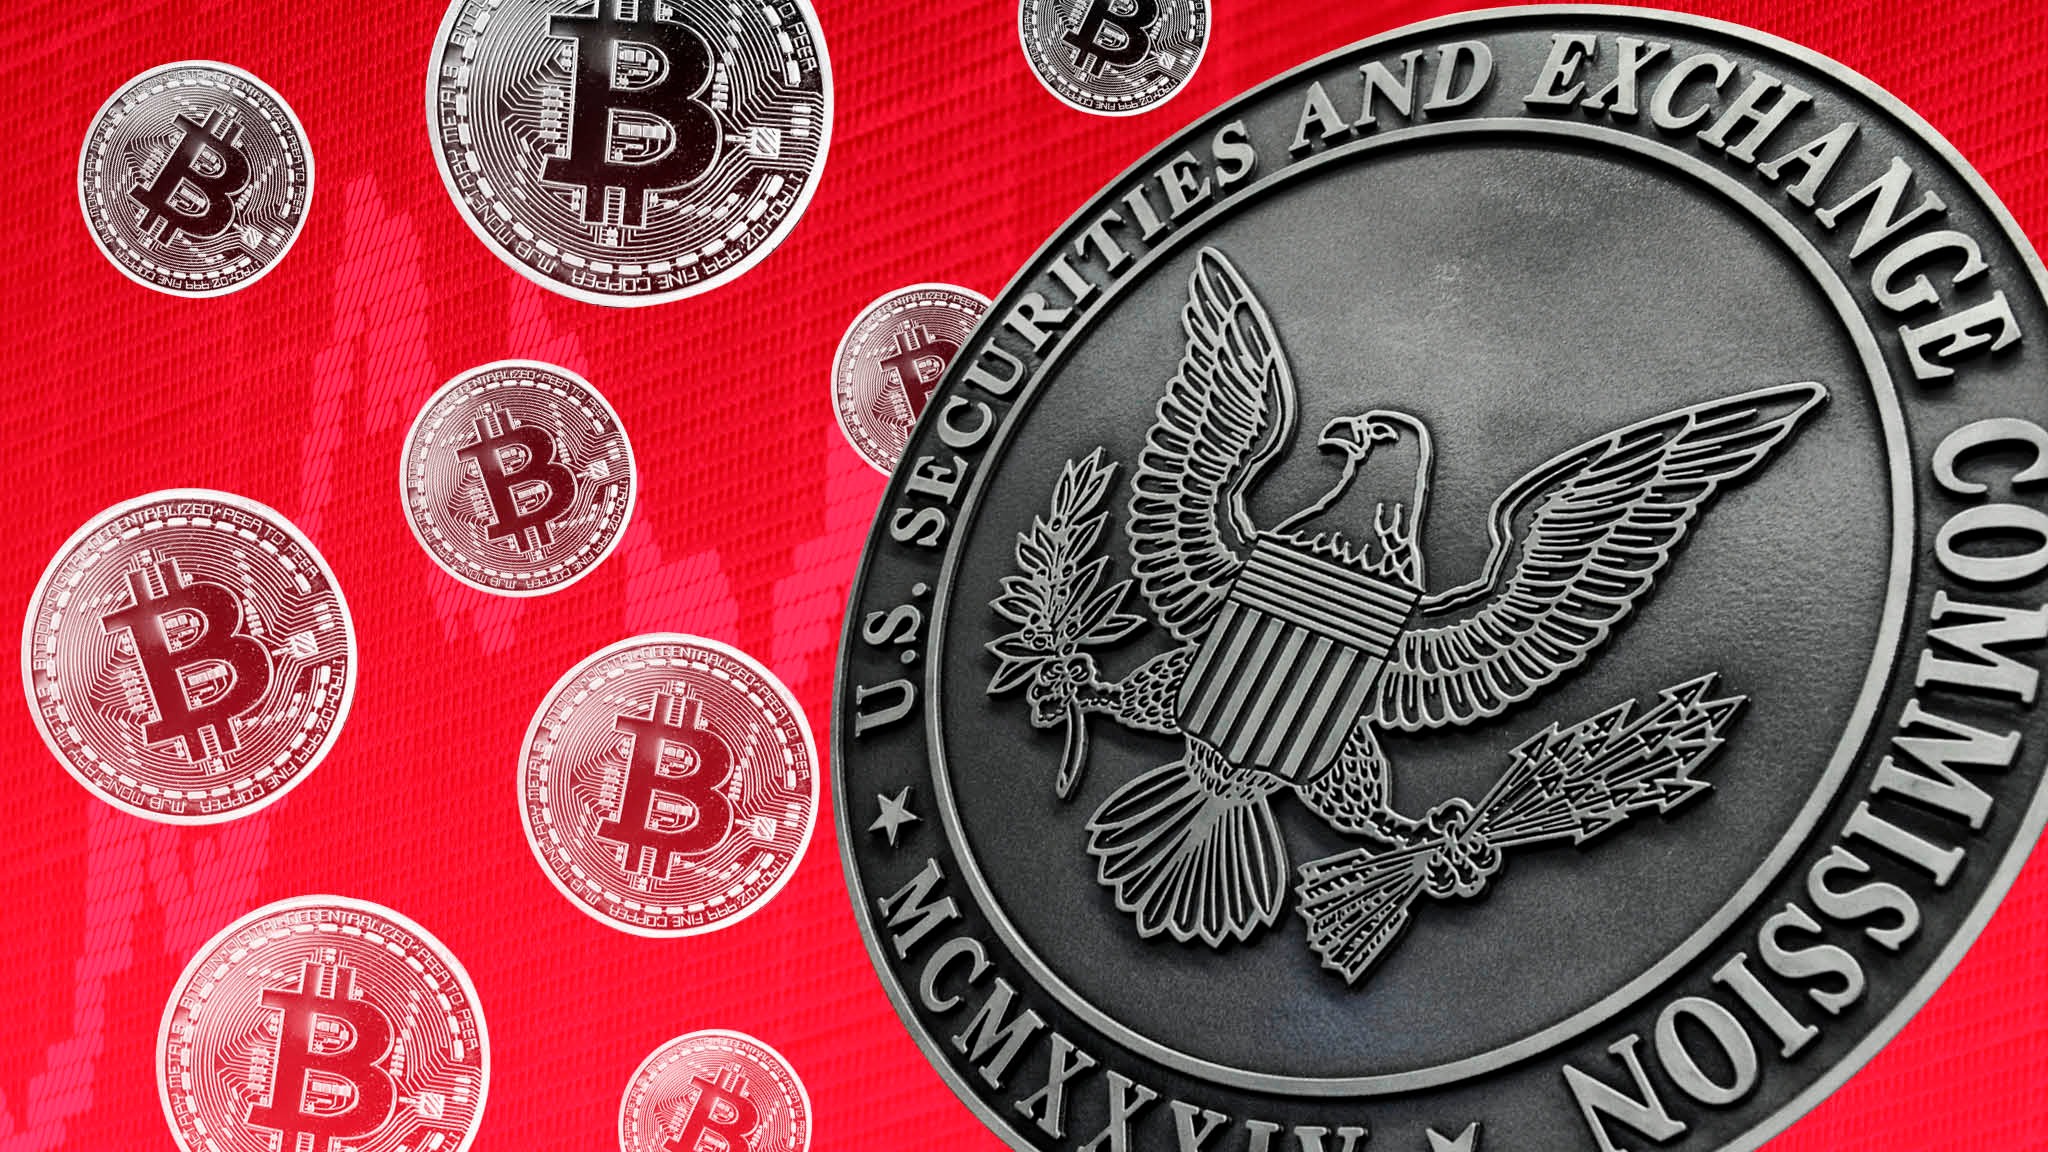 Sec bitcoin etf decision cftc wsj op ed cryptocurrency